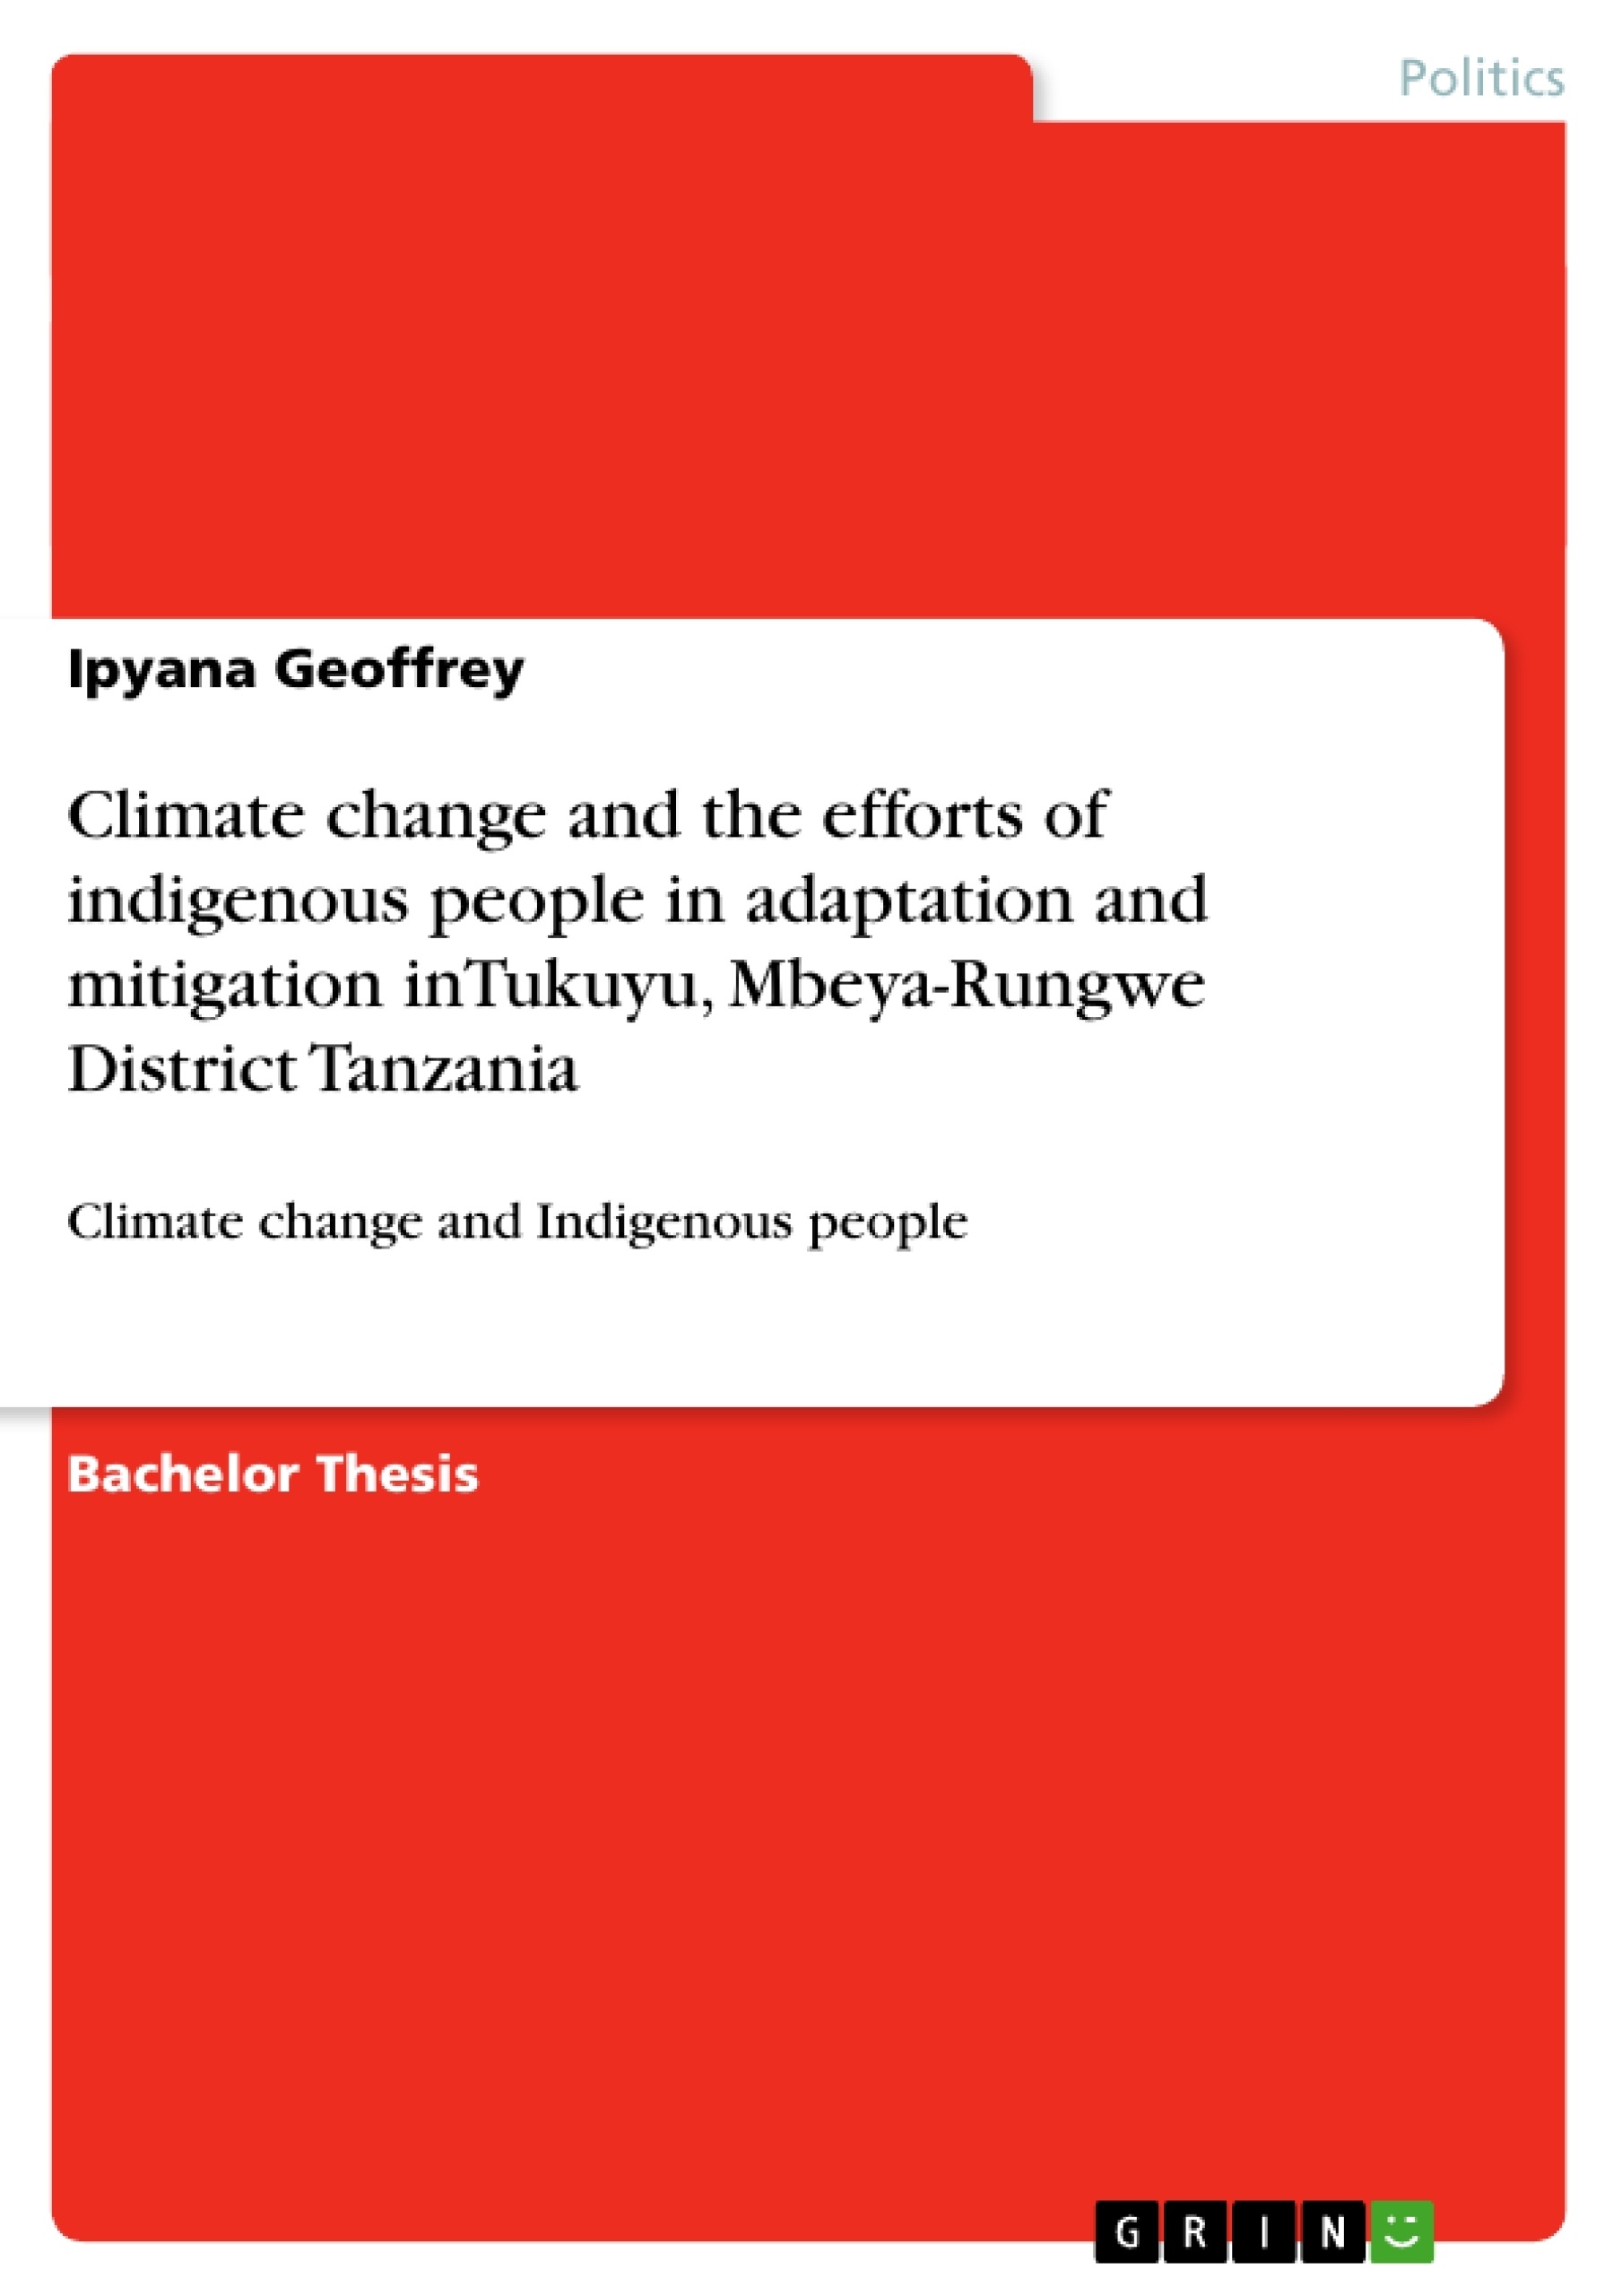 Title: Climate change and the efforts of indigenous people in adaptation and mitigation inTukuyu, Mbeya-Rungwe District Tanzania